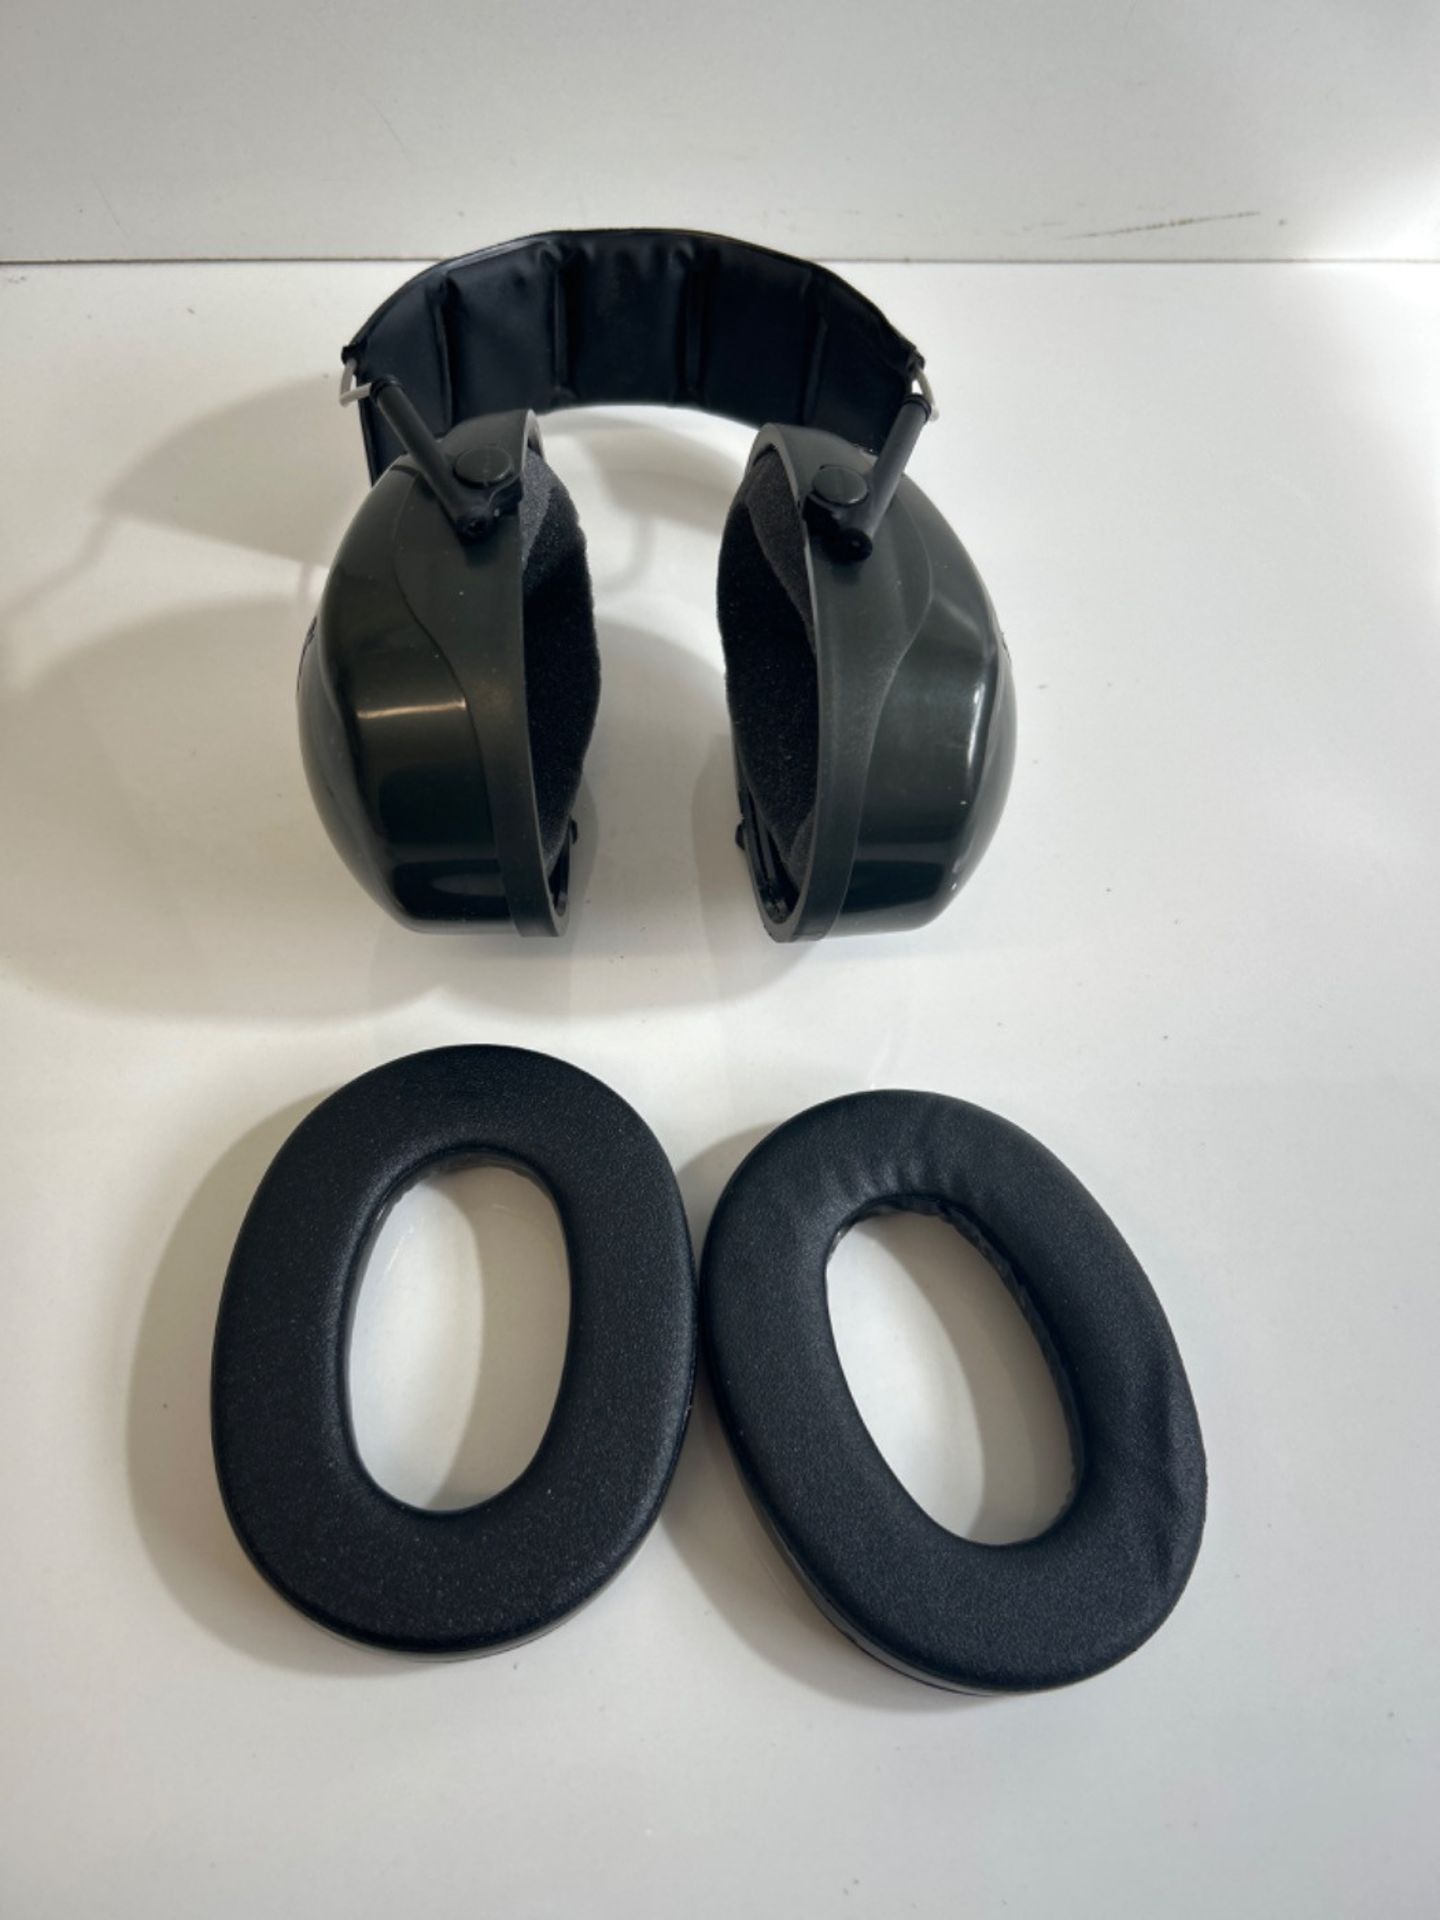 3M Peltor Optime II Comfort Earmuffs H520AC1, Ear Defenders Adults, Comfortable Fit with Reduced Pr - Image 2 of 3